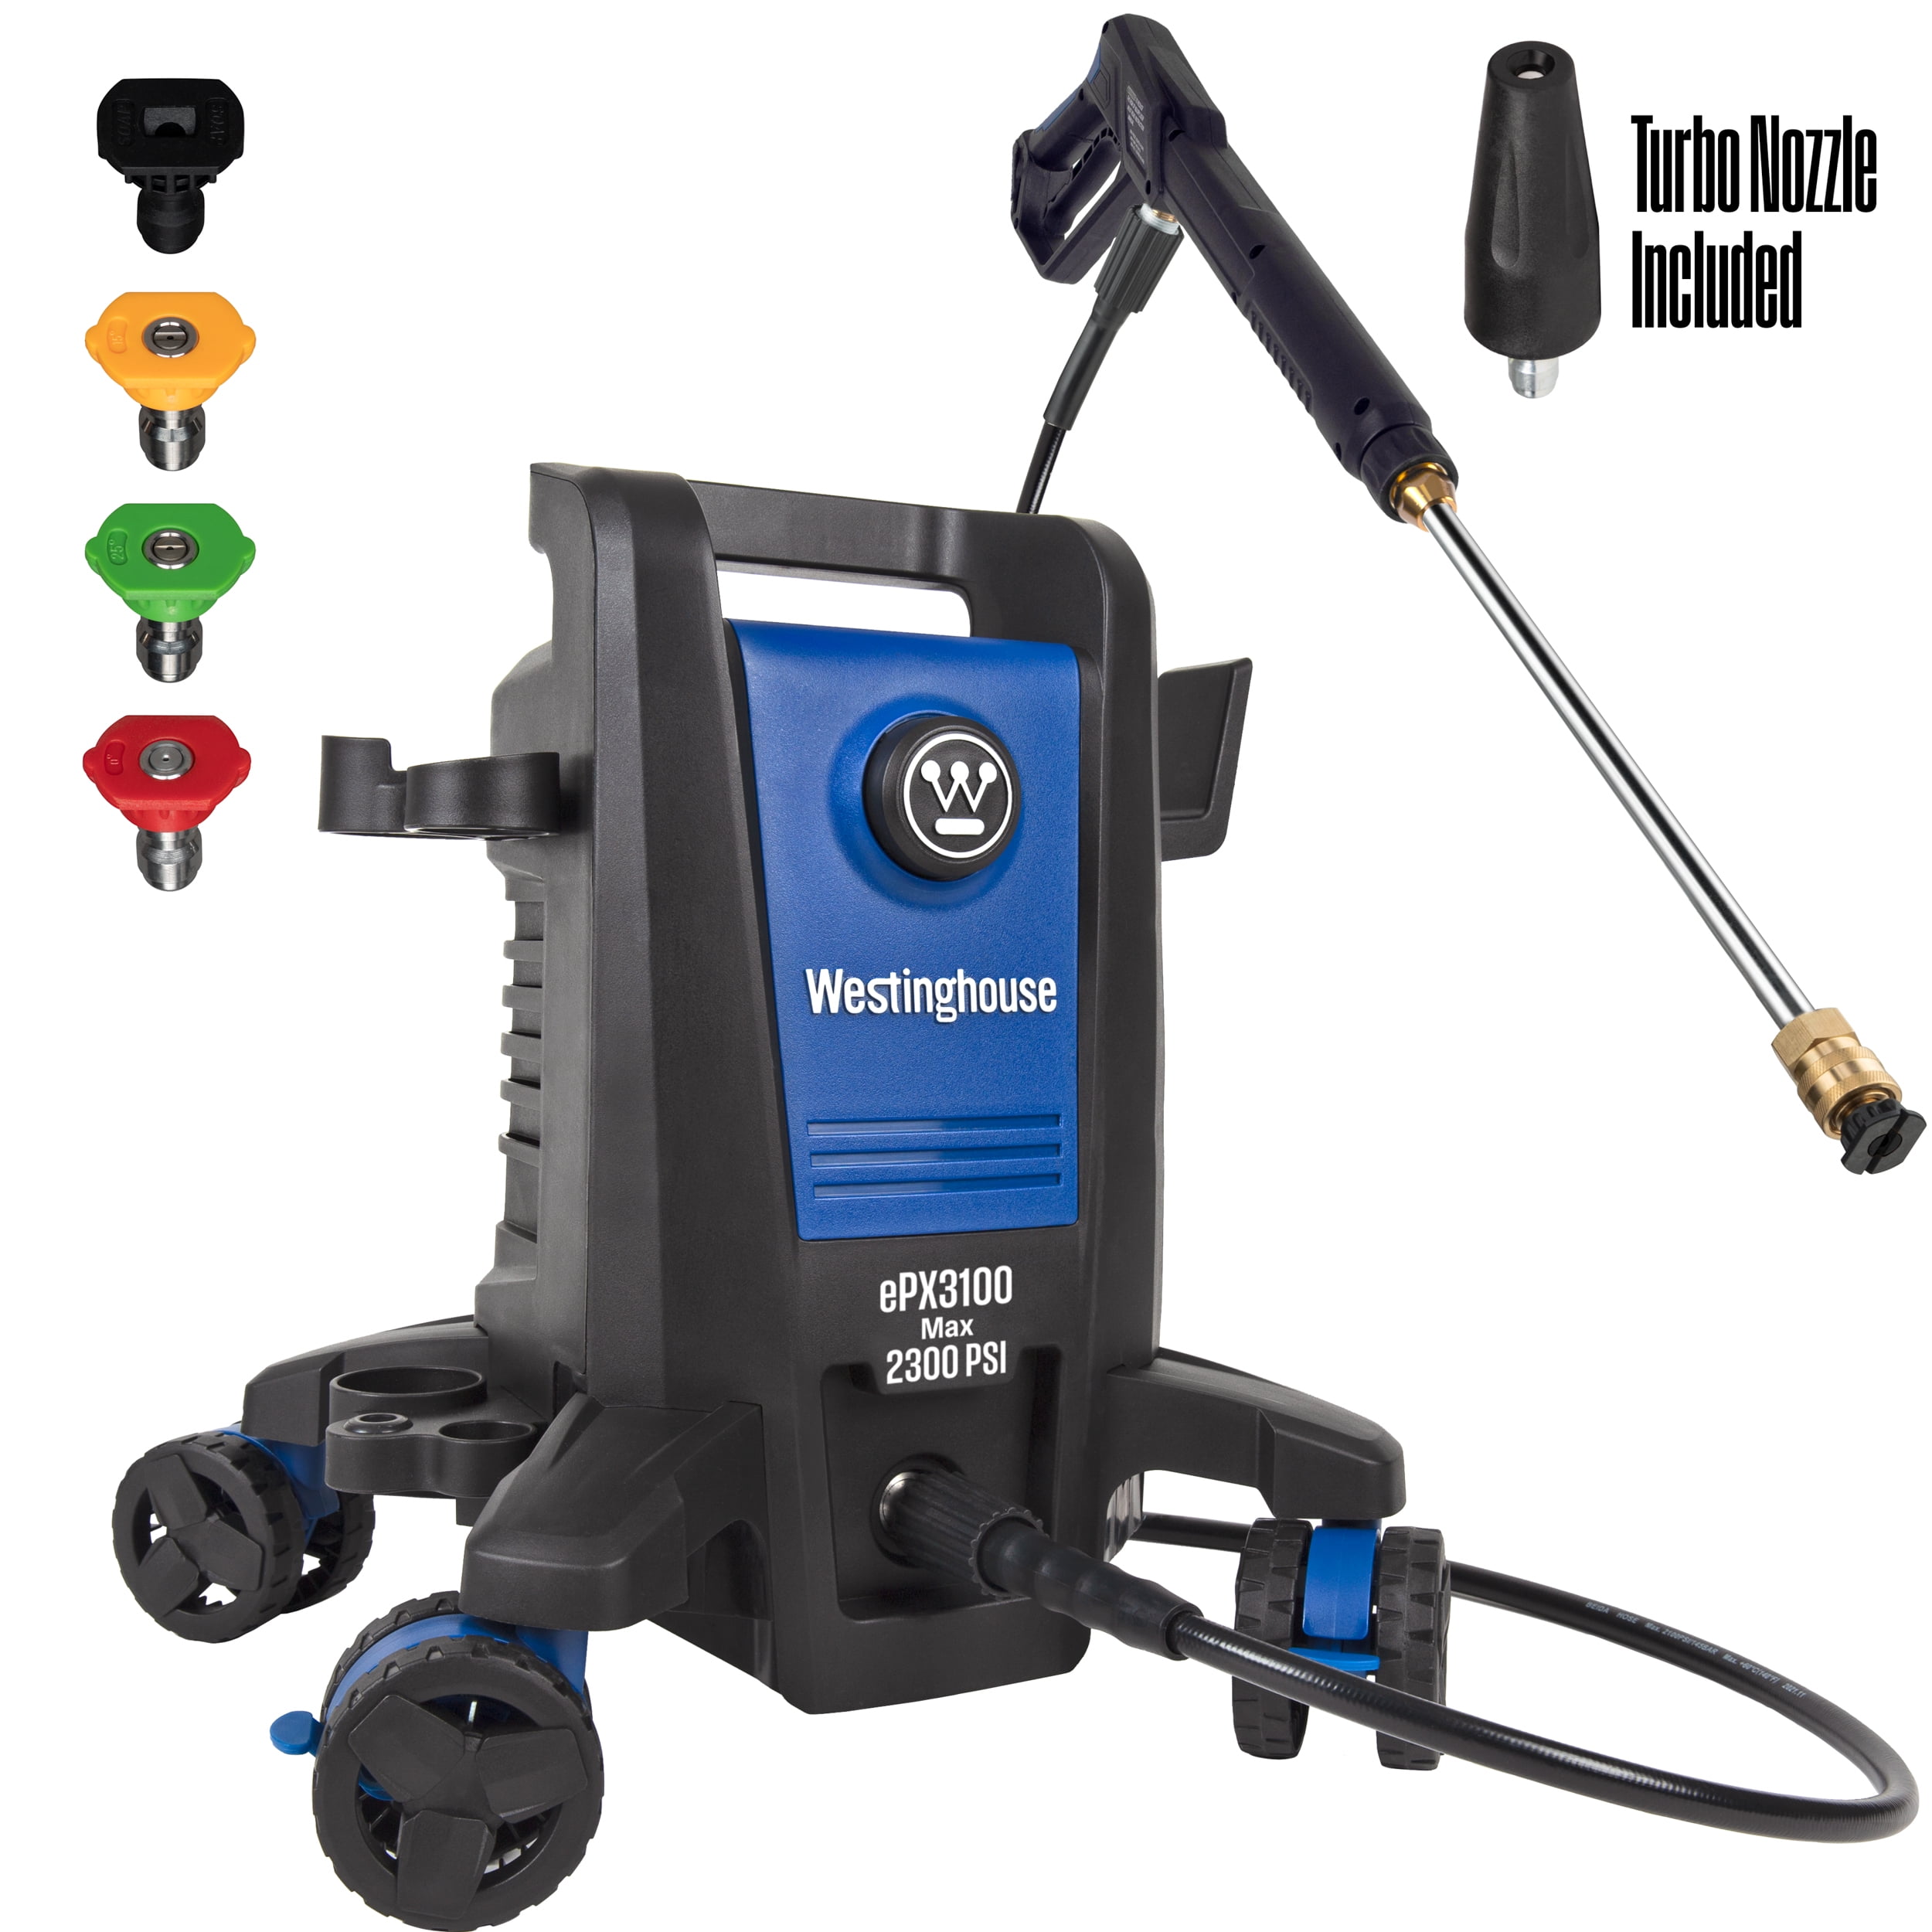 Westinghouse 2300 Max PSI Electric Pressure Washer, 1.76-GPM, Soap